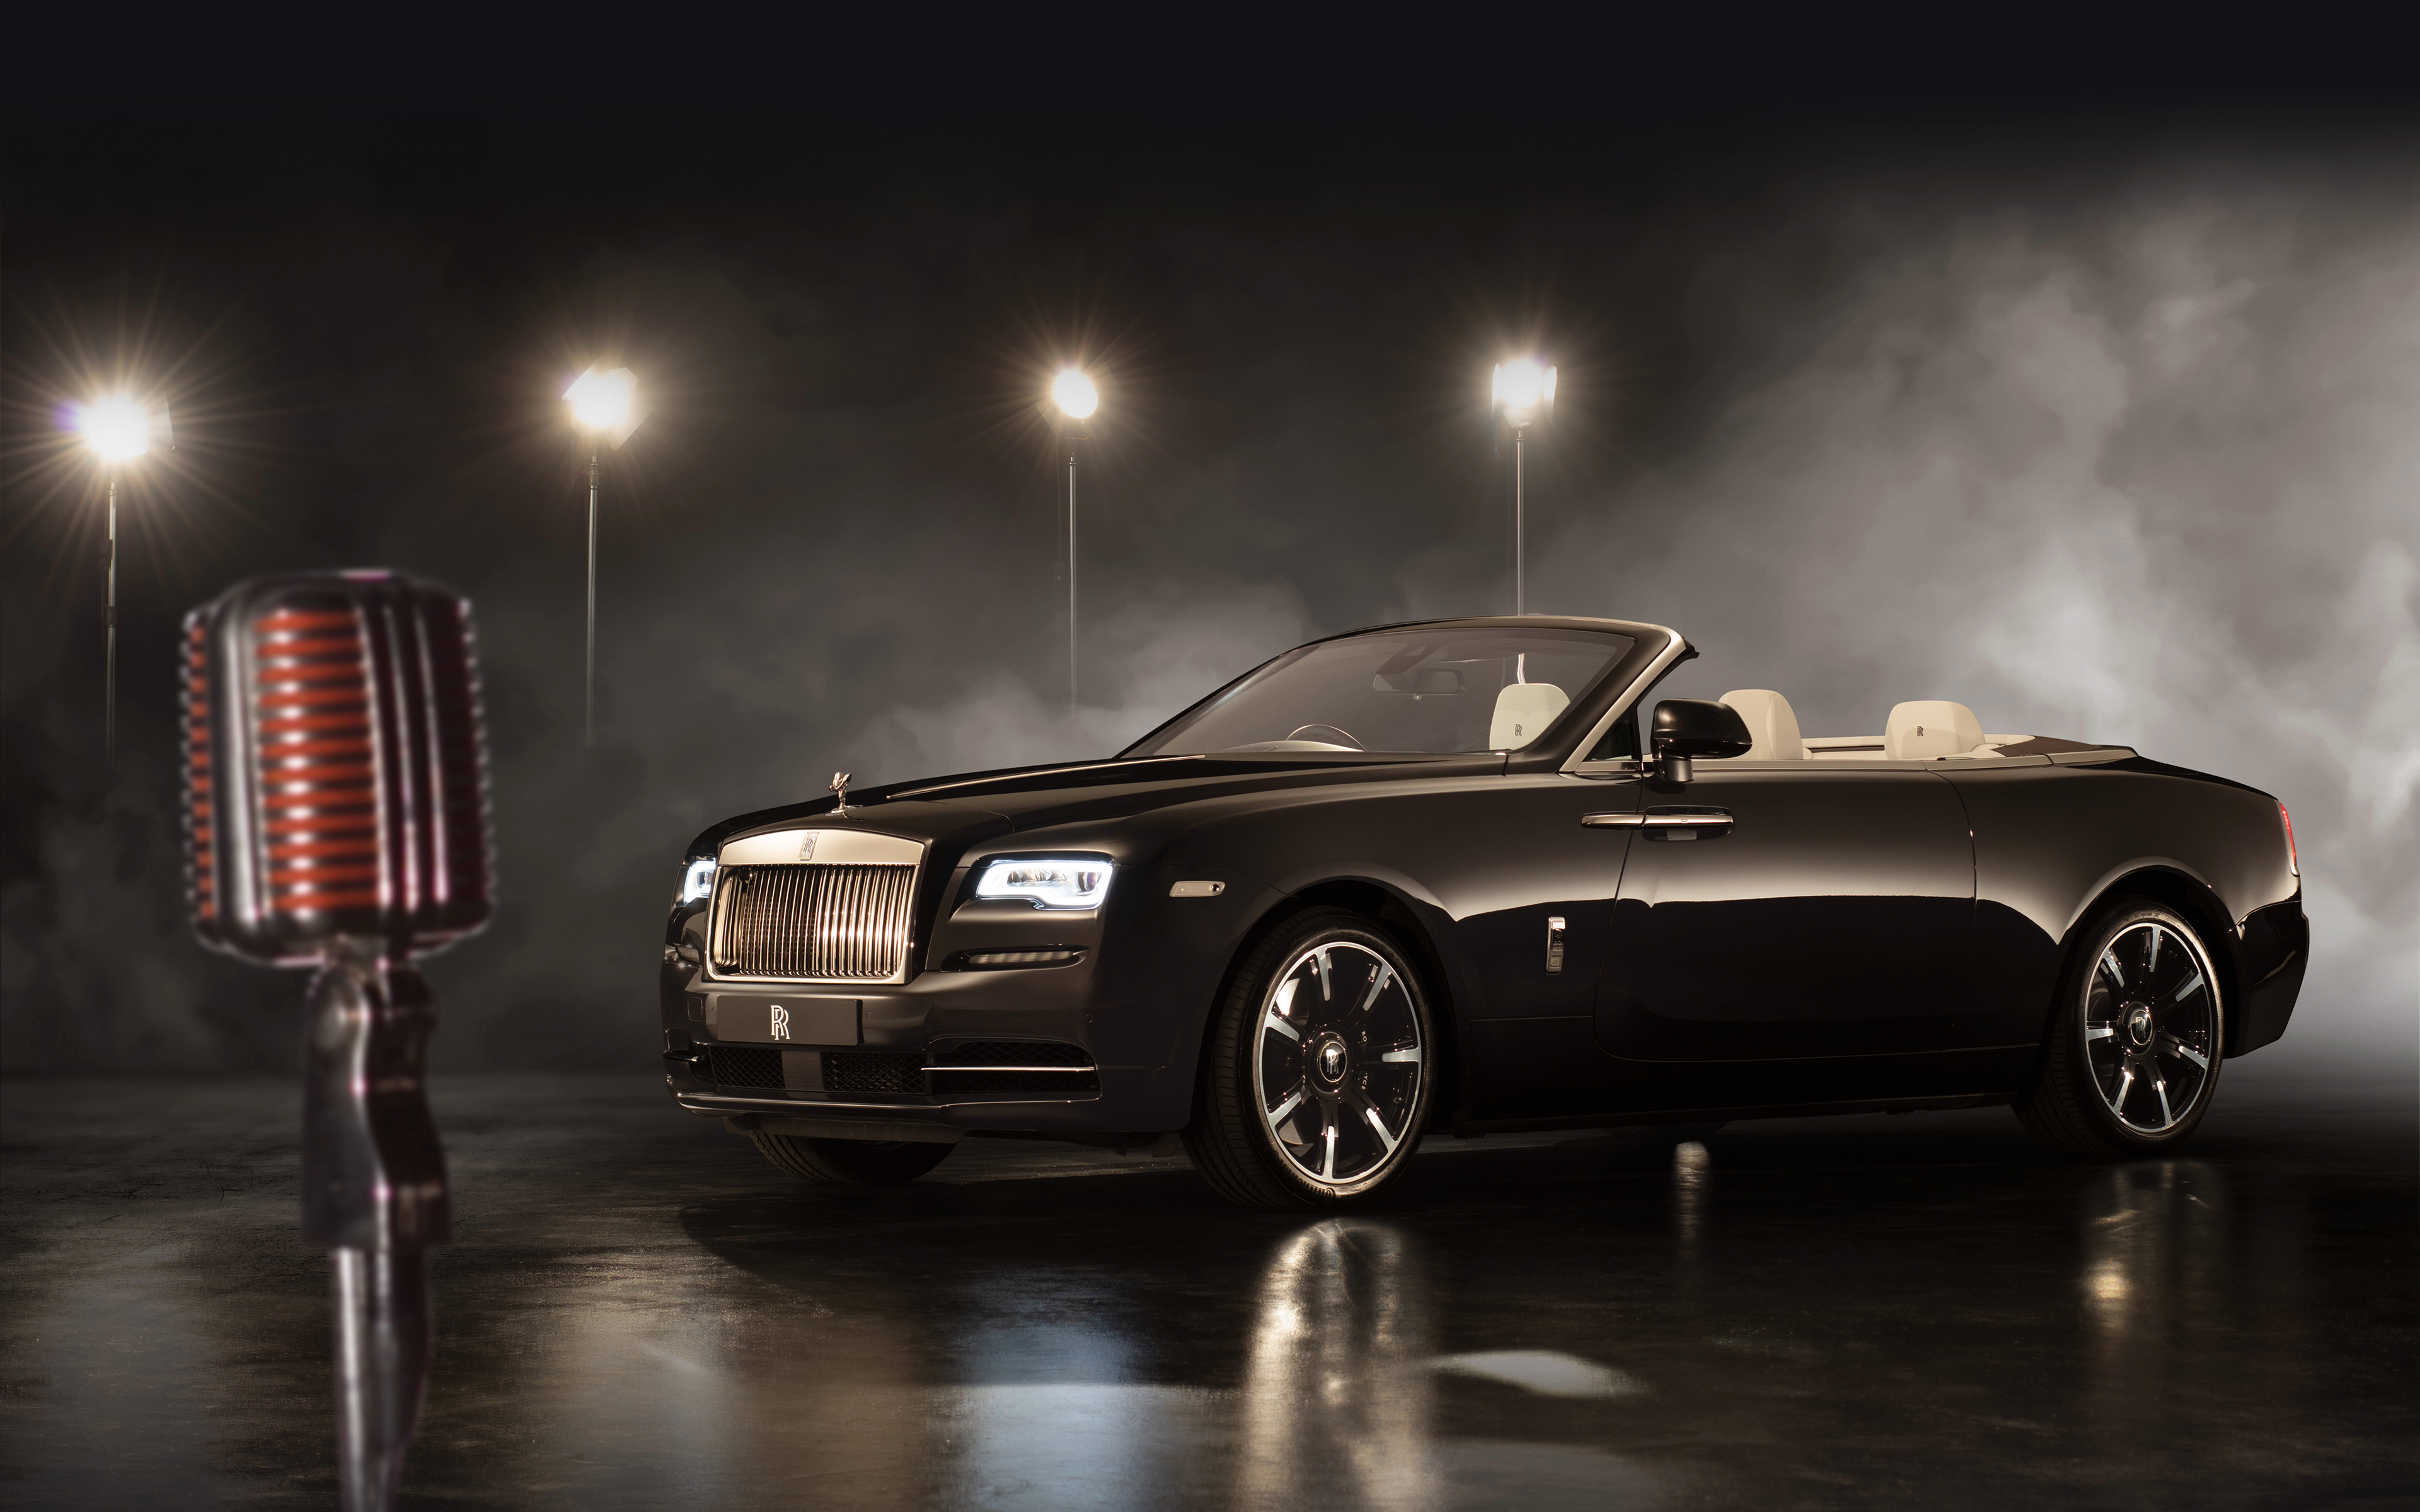 Rolls-Royce Dawn Inspired by Music 2018 4K Wallpapers